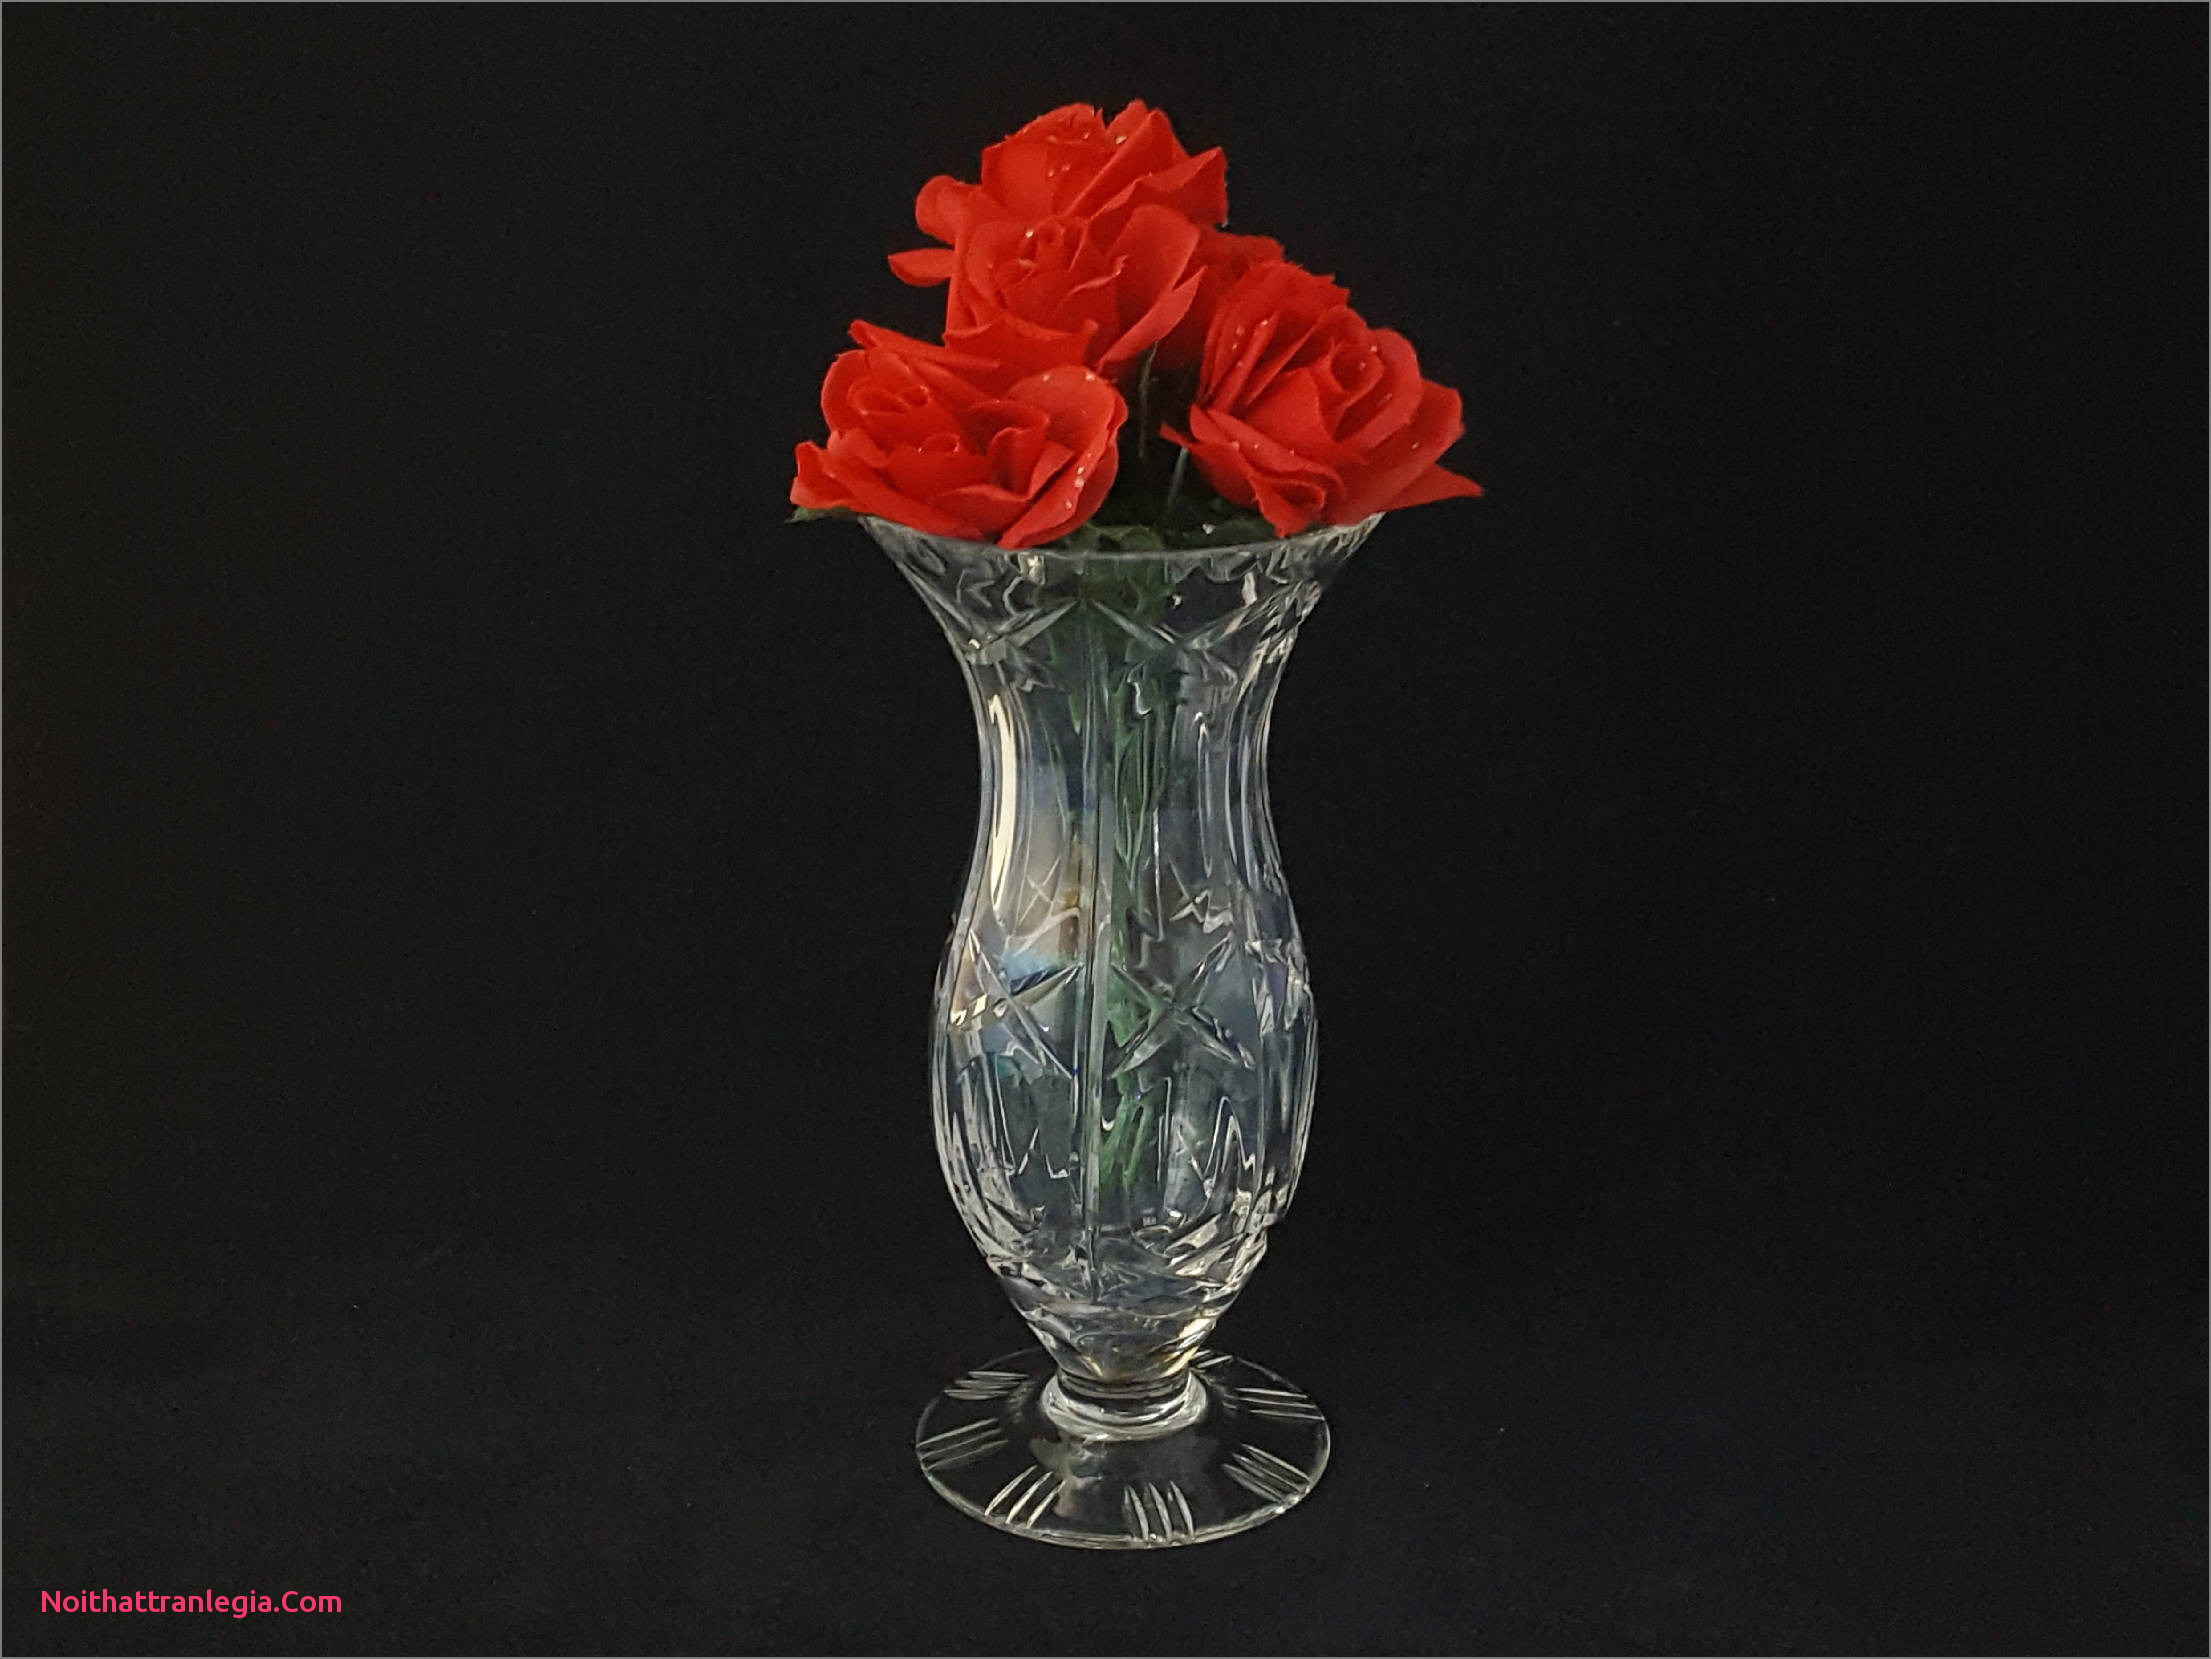 17 Fantastic Waterford Footed Vase 2024 free download waterford footed vase of 20 cut glass antique vase noithattranlegia vases design pertaining to aac2b8ac2bdzoom